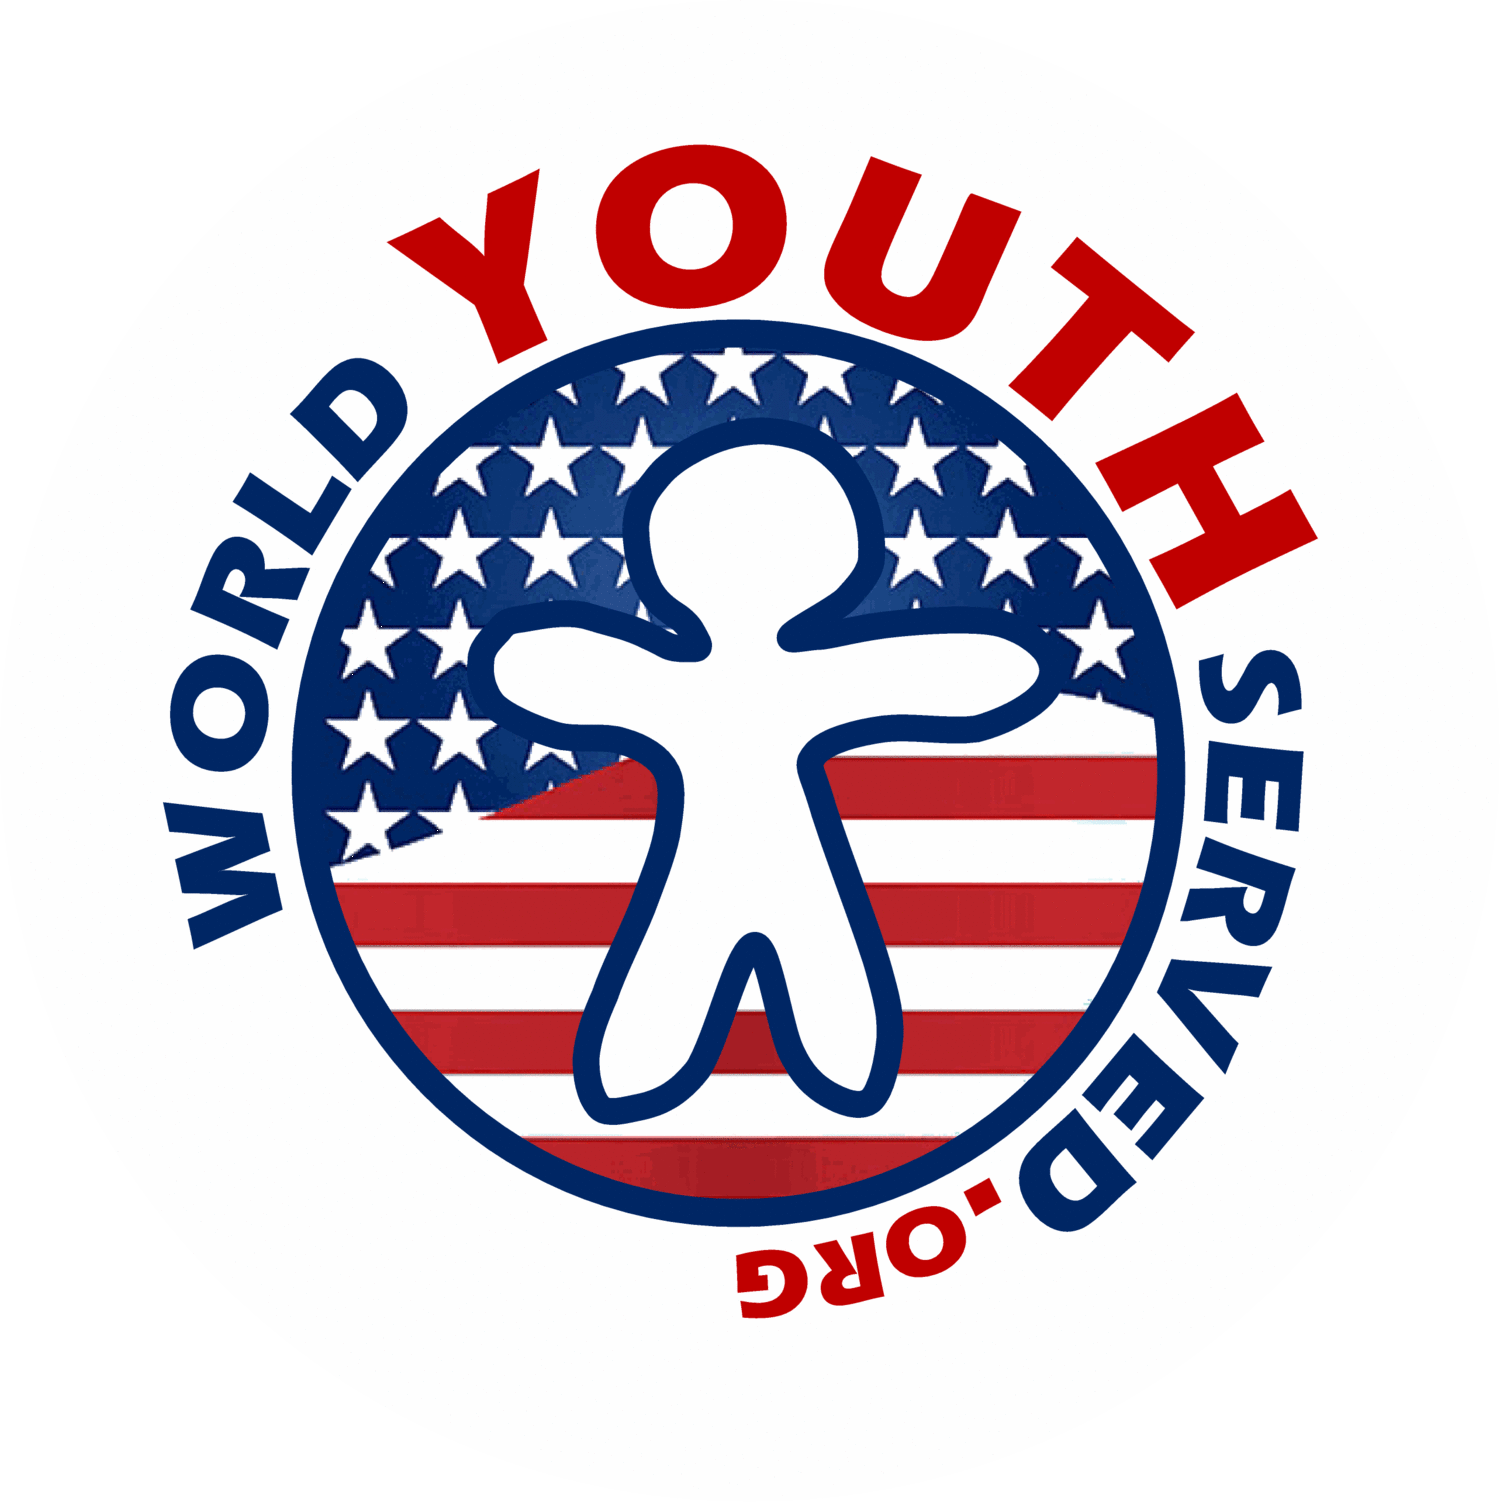 World Youth Served